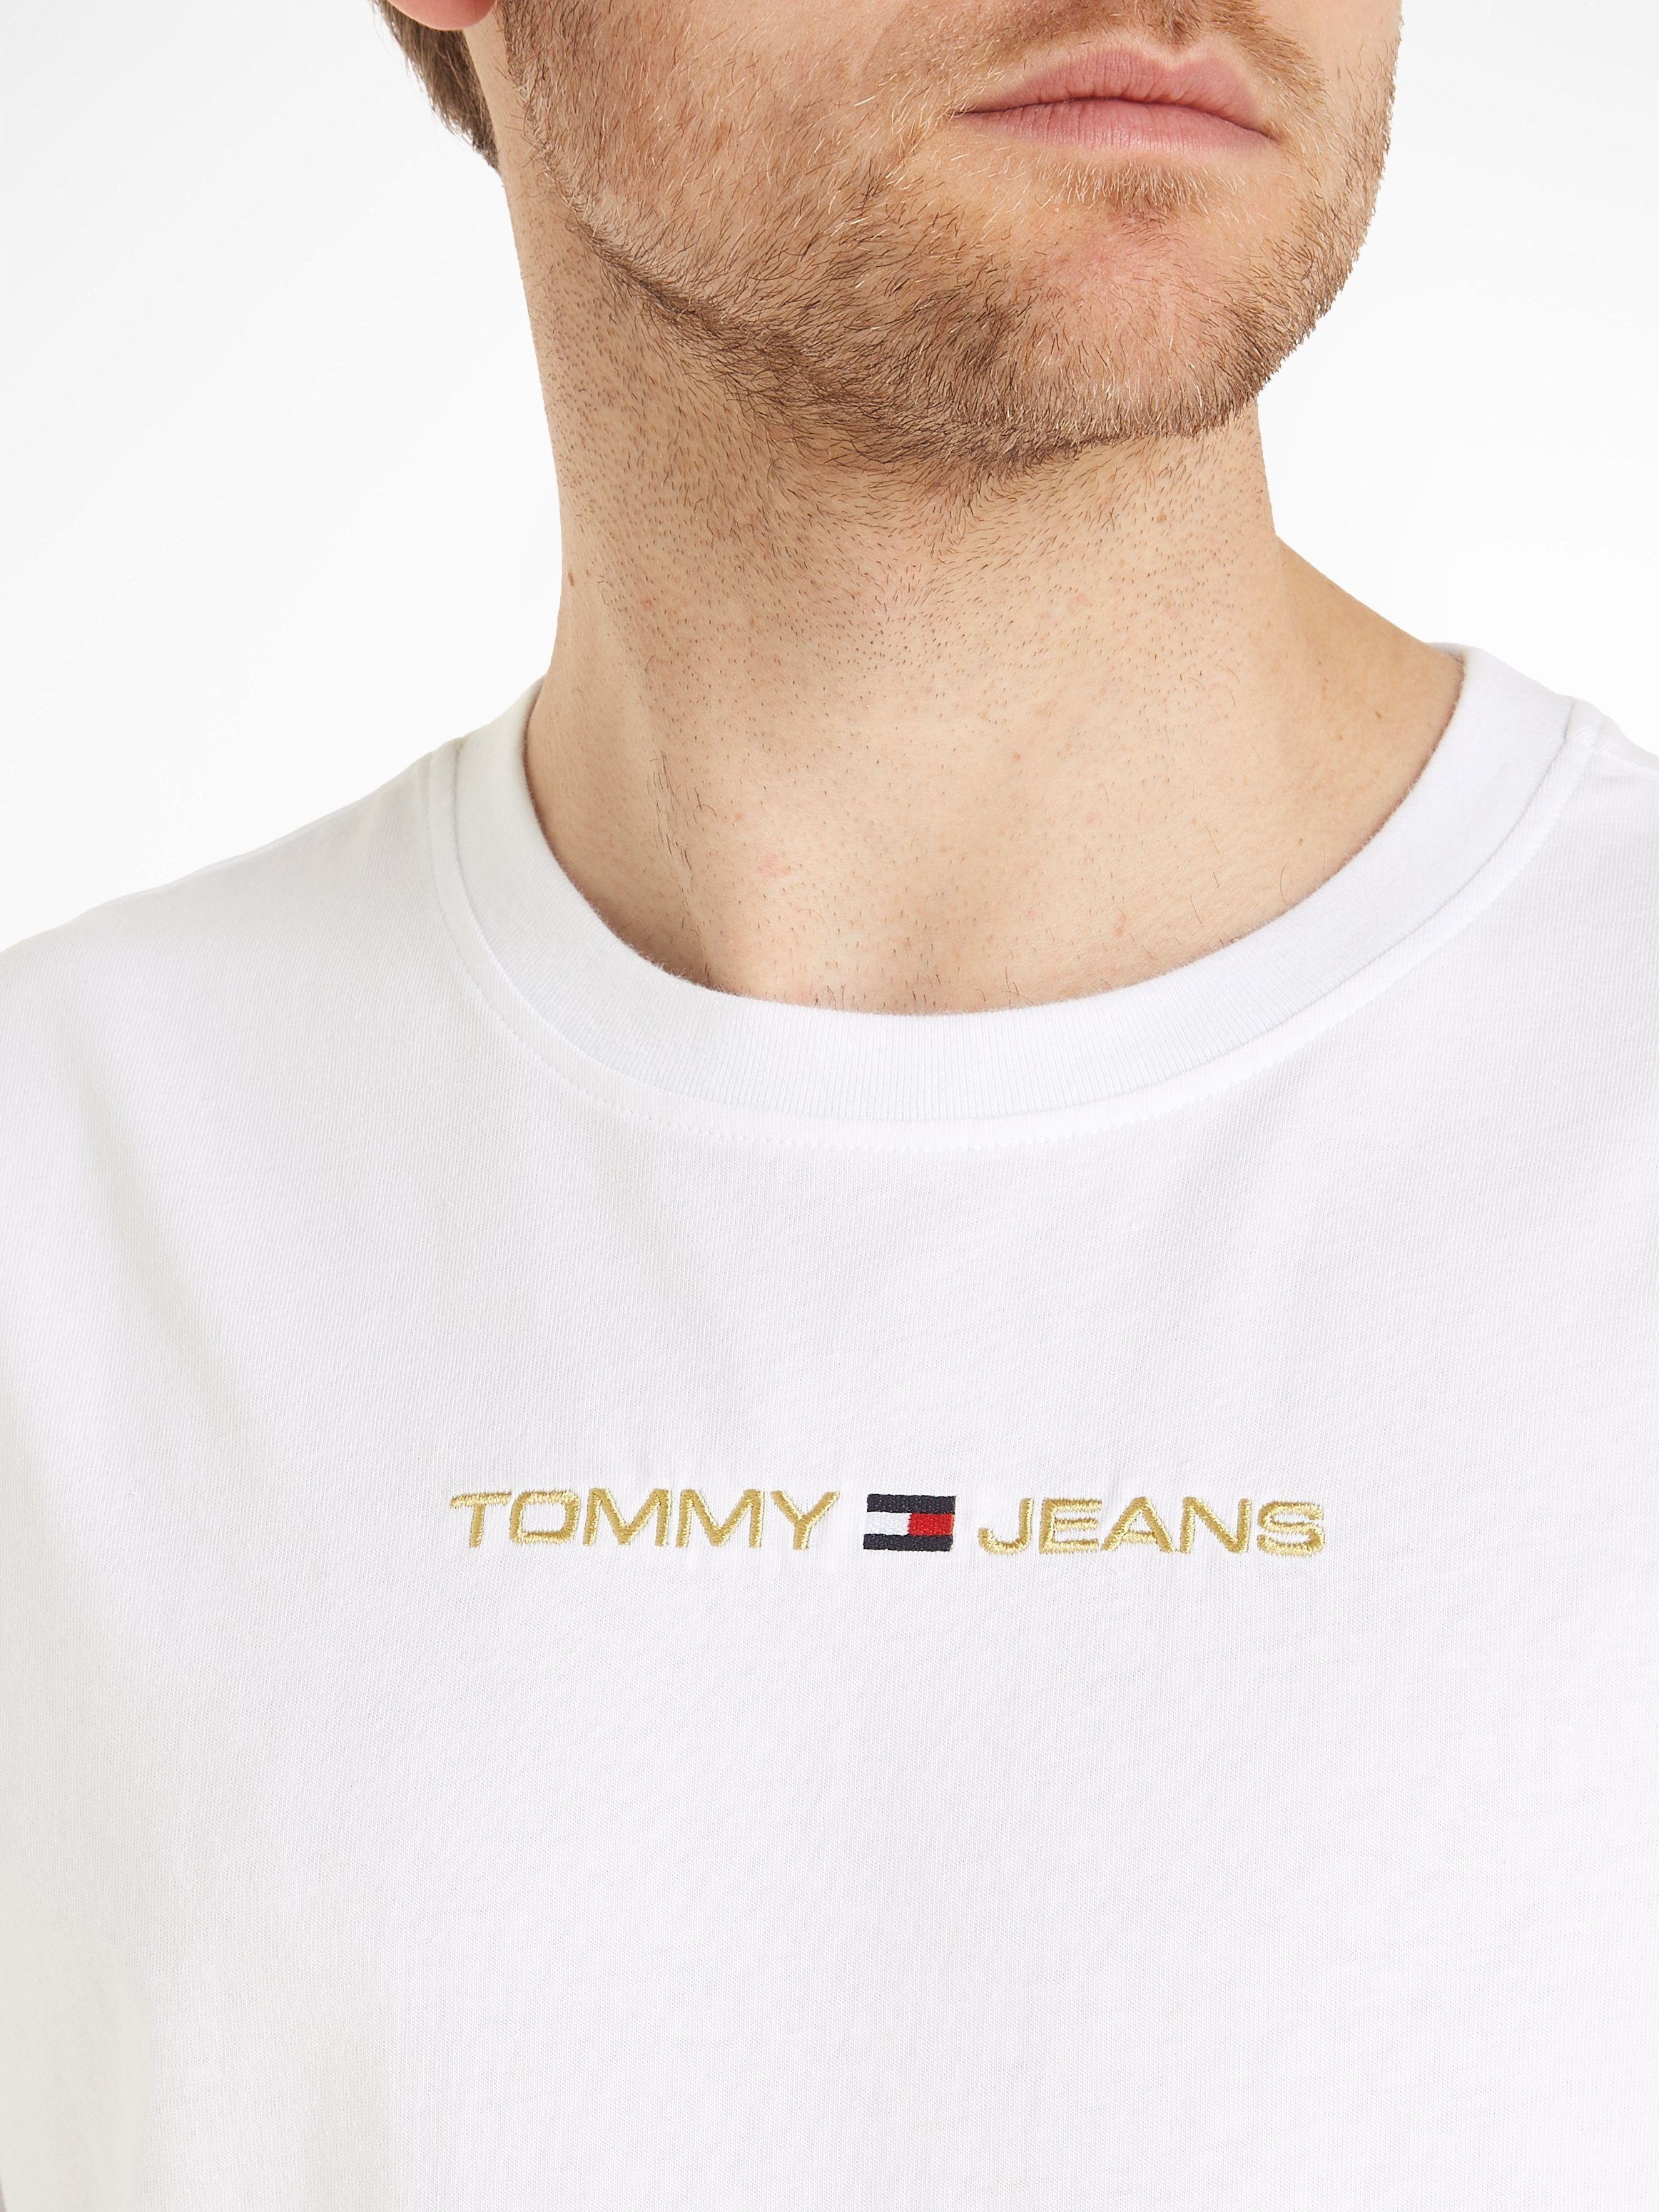 Jeans T-Shirt CLSC Tommy LINEAR White TJM TEE GOLD